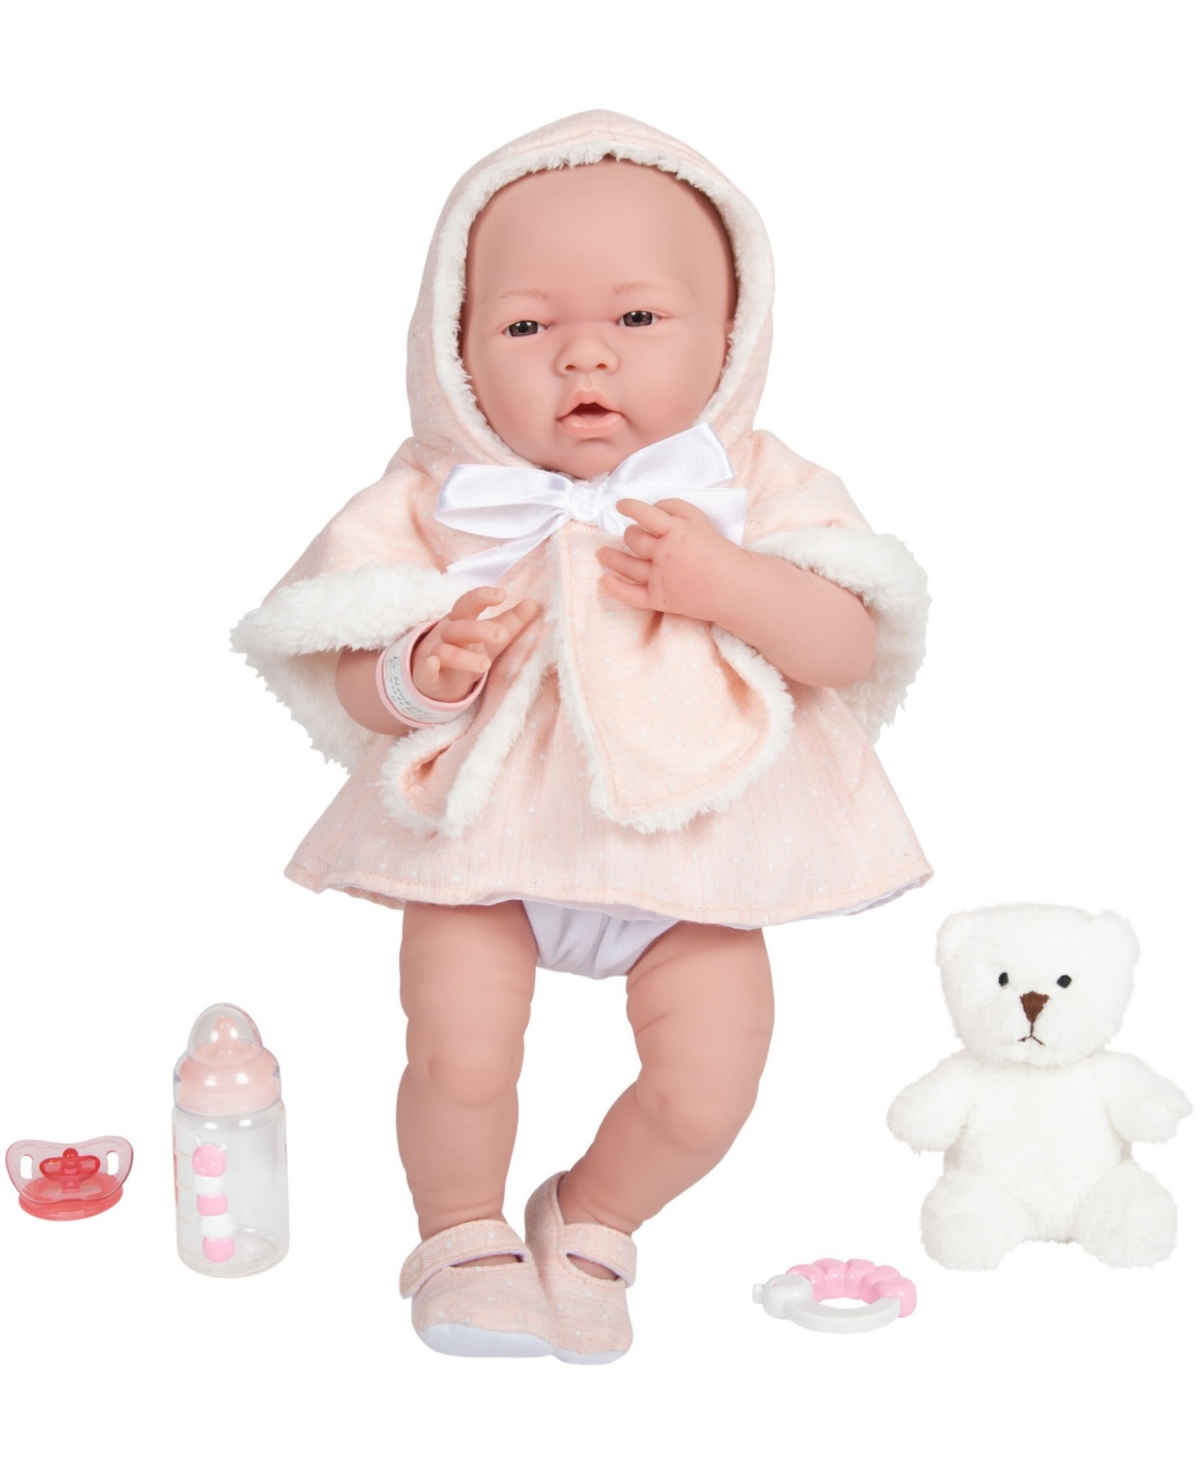 Jc Toys Kids' La Newborn 15" Real Girl Baby Doll With Teddy Bear Set, 9 Pieces In Blush